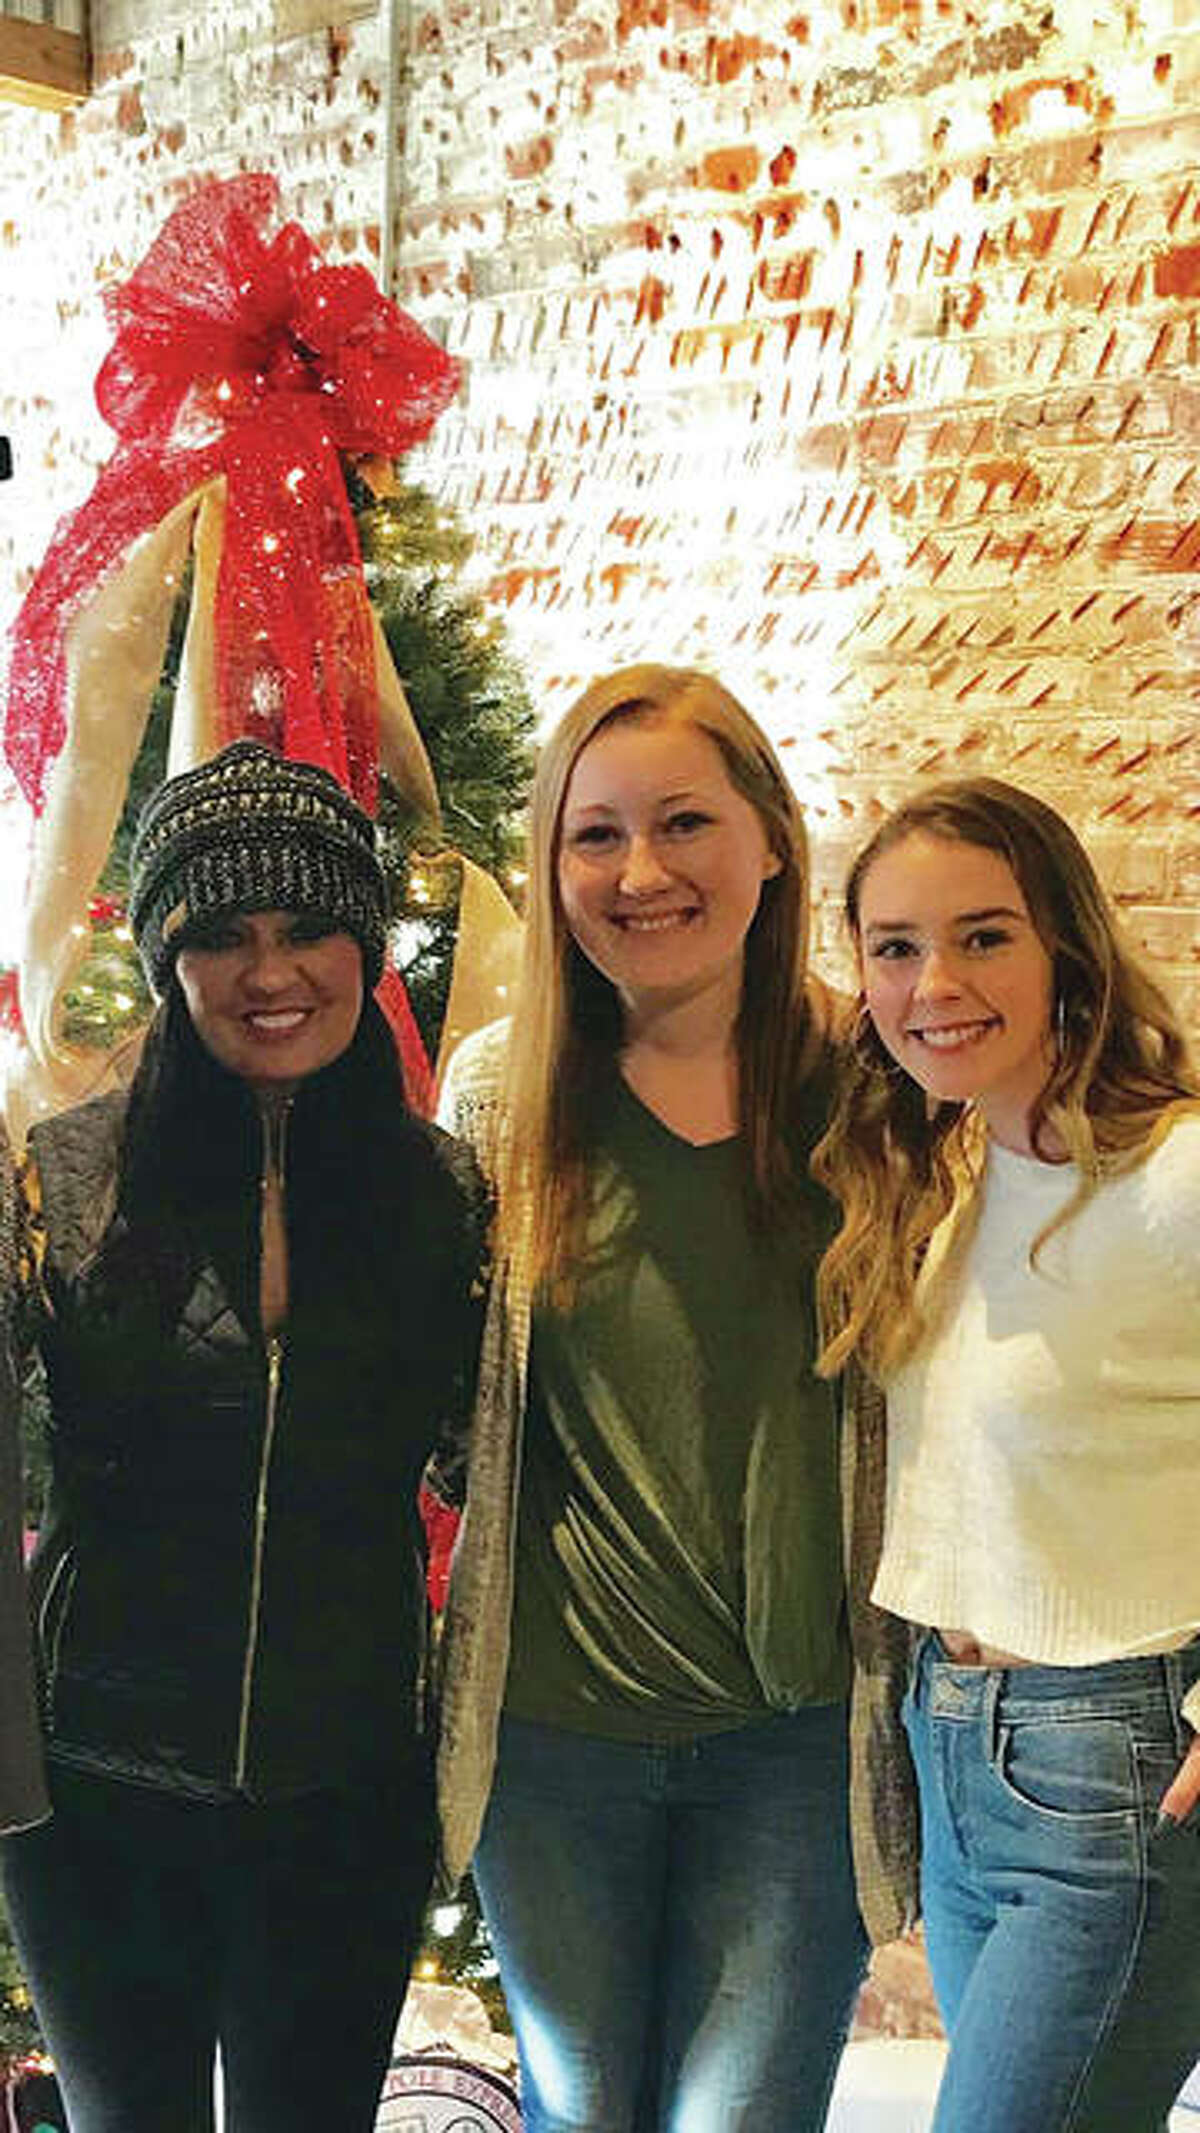 Sour Mash Boutique’s founder and reLoved Leather designer Kenneathia Hagen, with staff member Emily Whitaker and Hagen’s daughter, Kennedi Brown, who also works for the retailer.